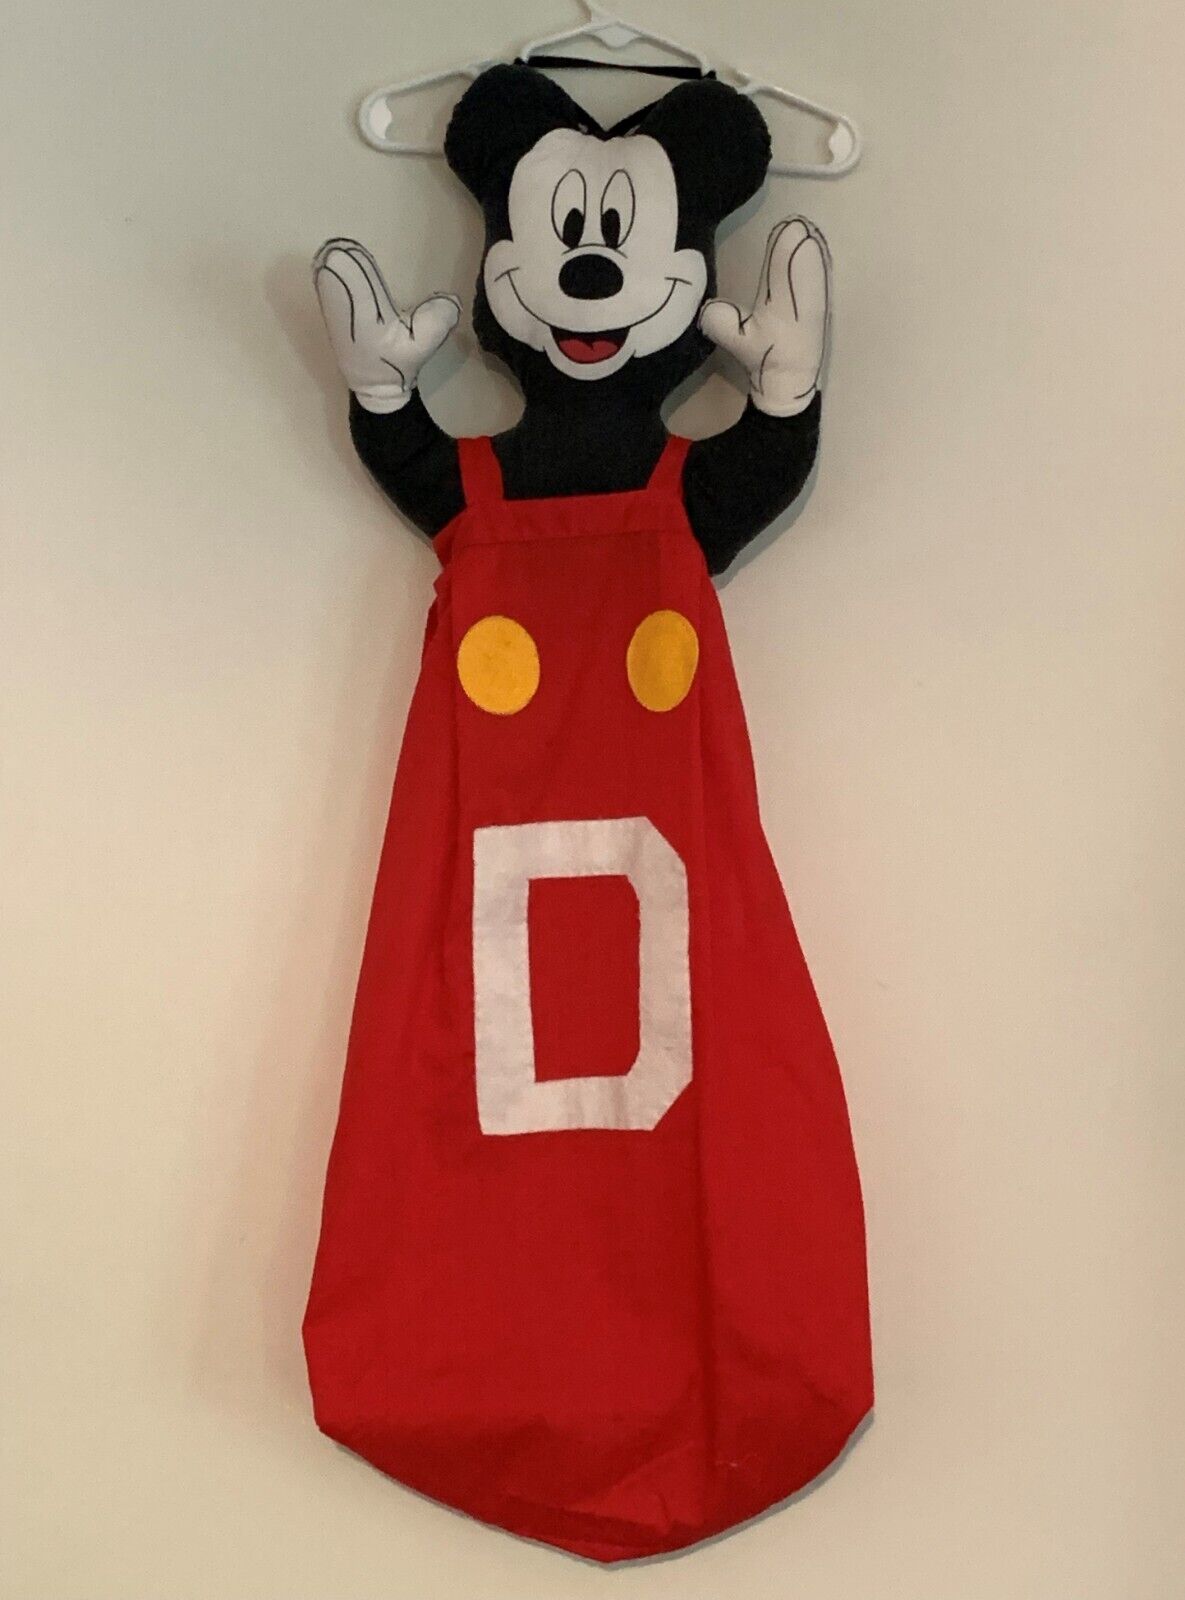 Vintage Mickey Mouse 1980's Disney Baby Hanging Diaper Holder Stacker Crib 35"